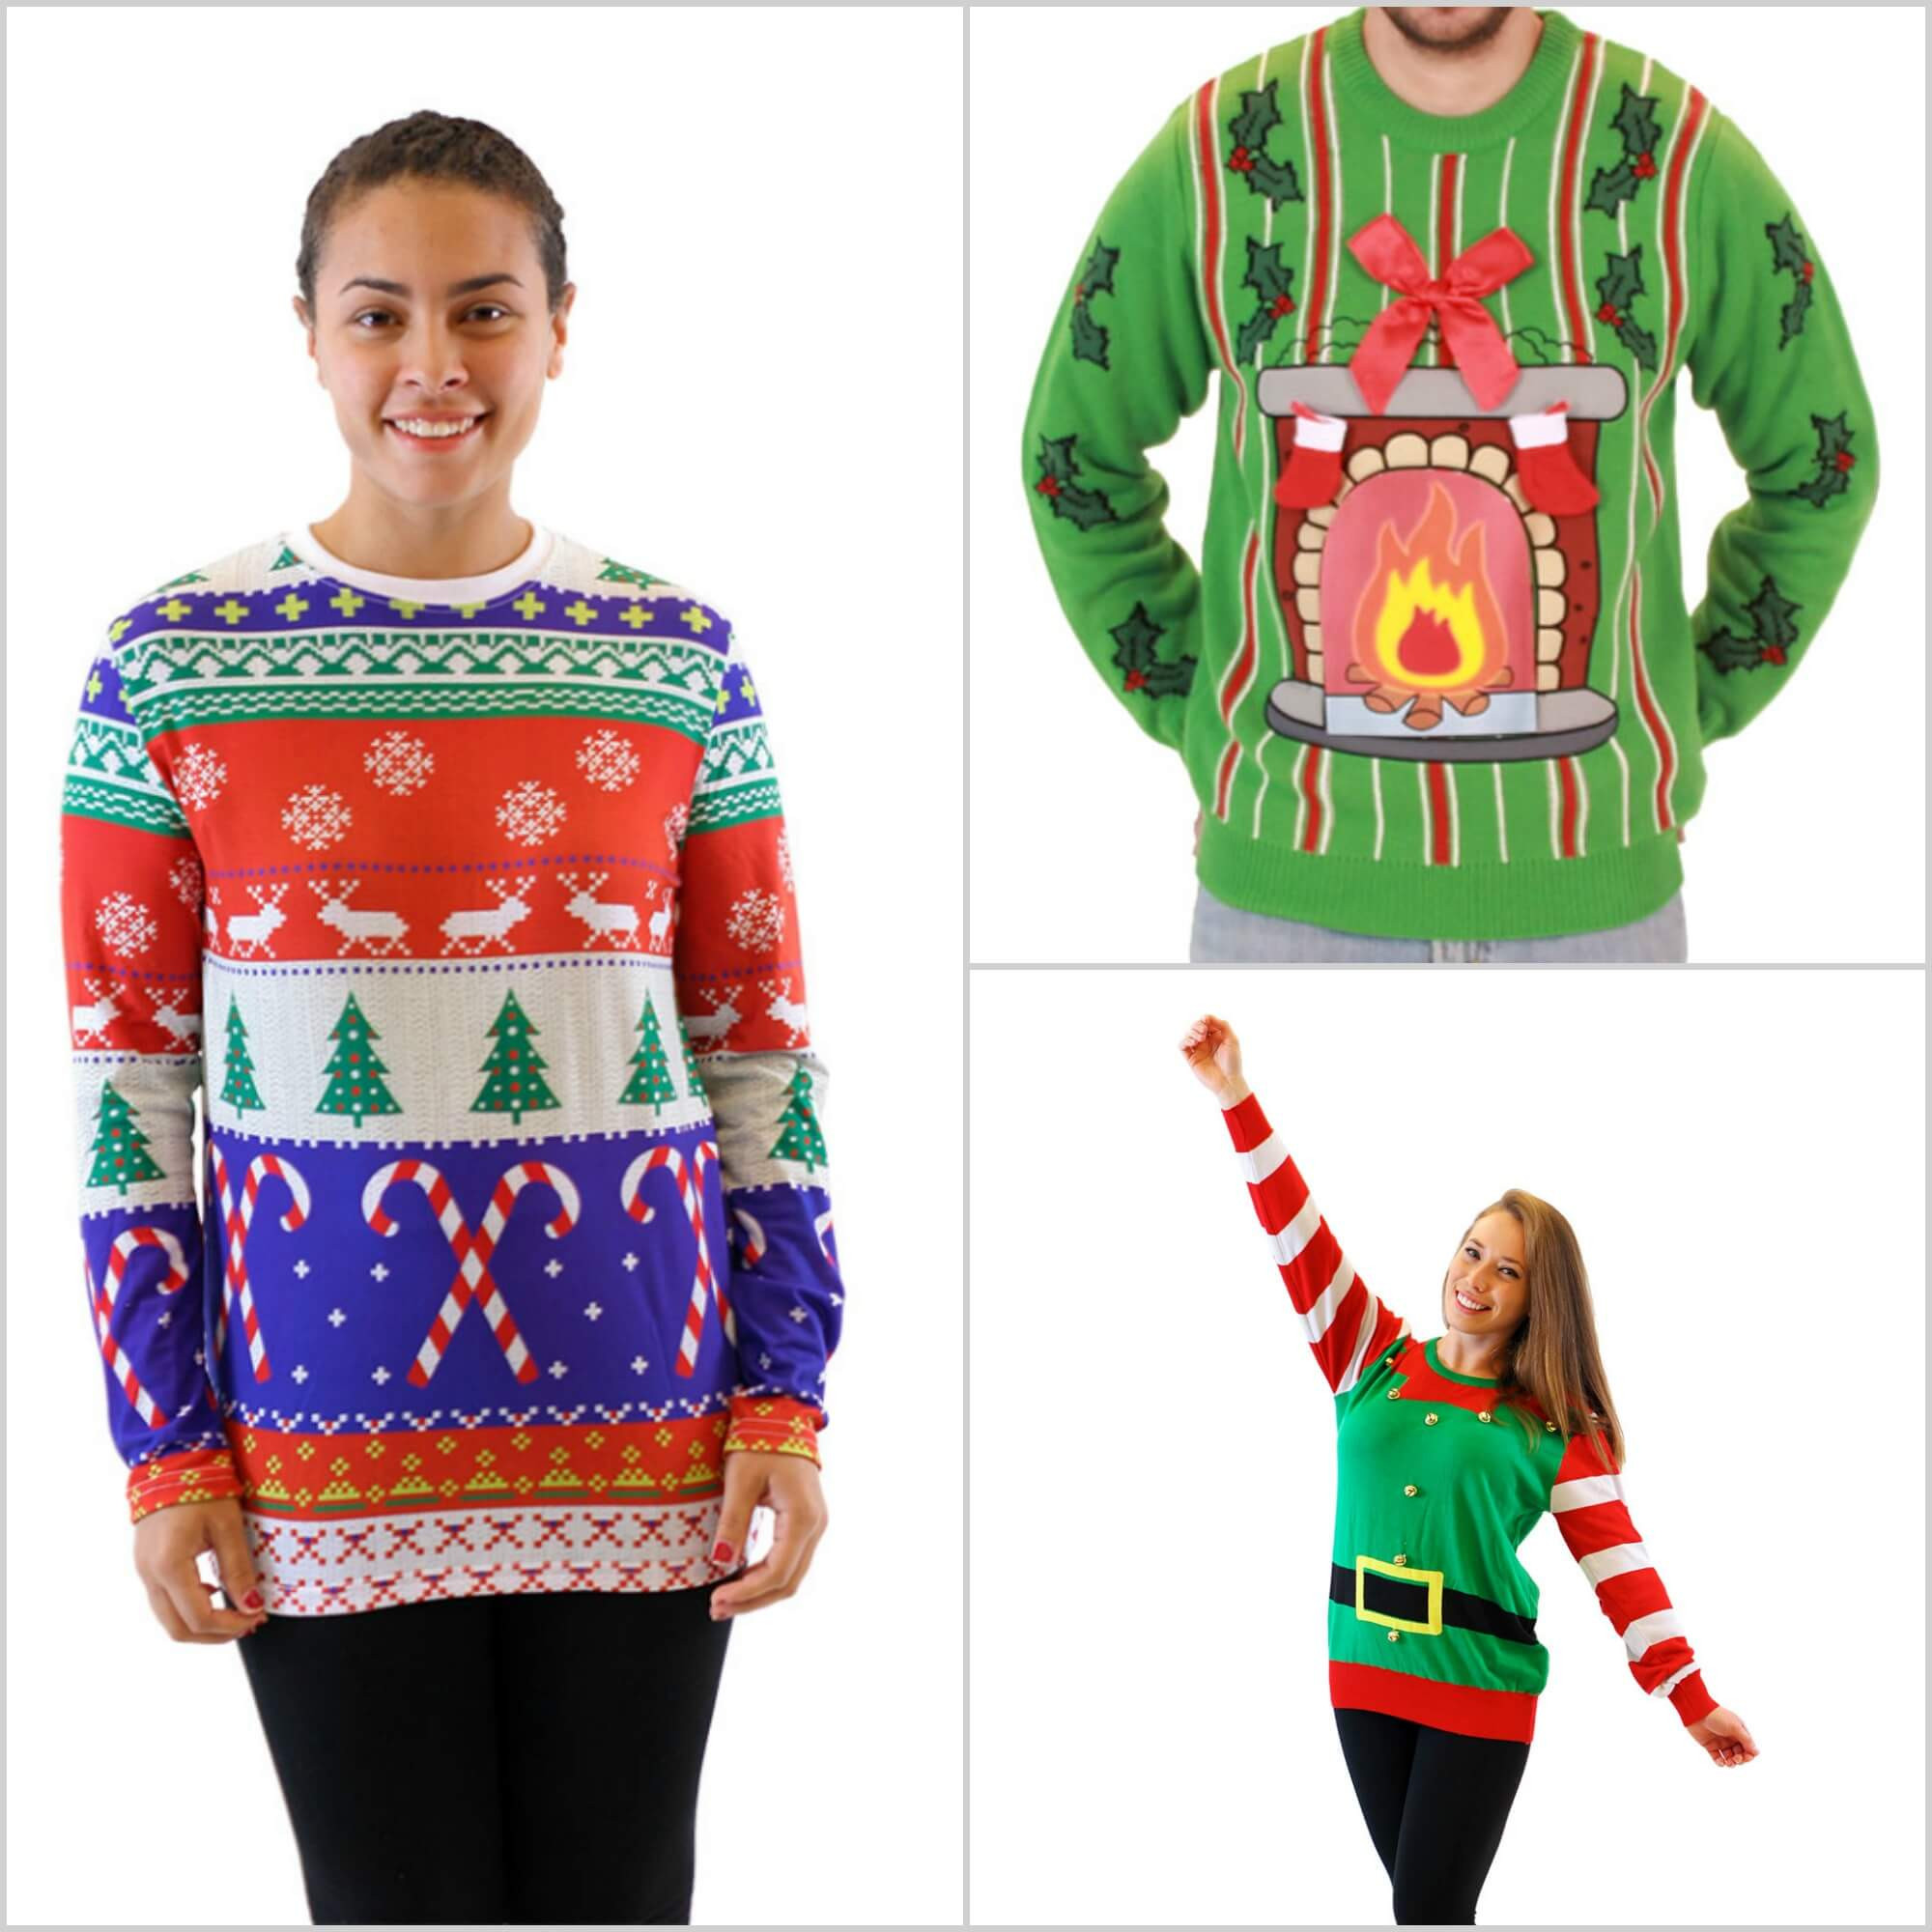 Christmas Sweater Ideas For A Party
 Ugly Christmas Sweater Party Ideas